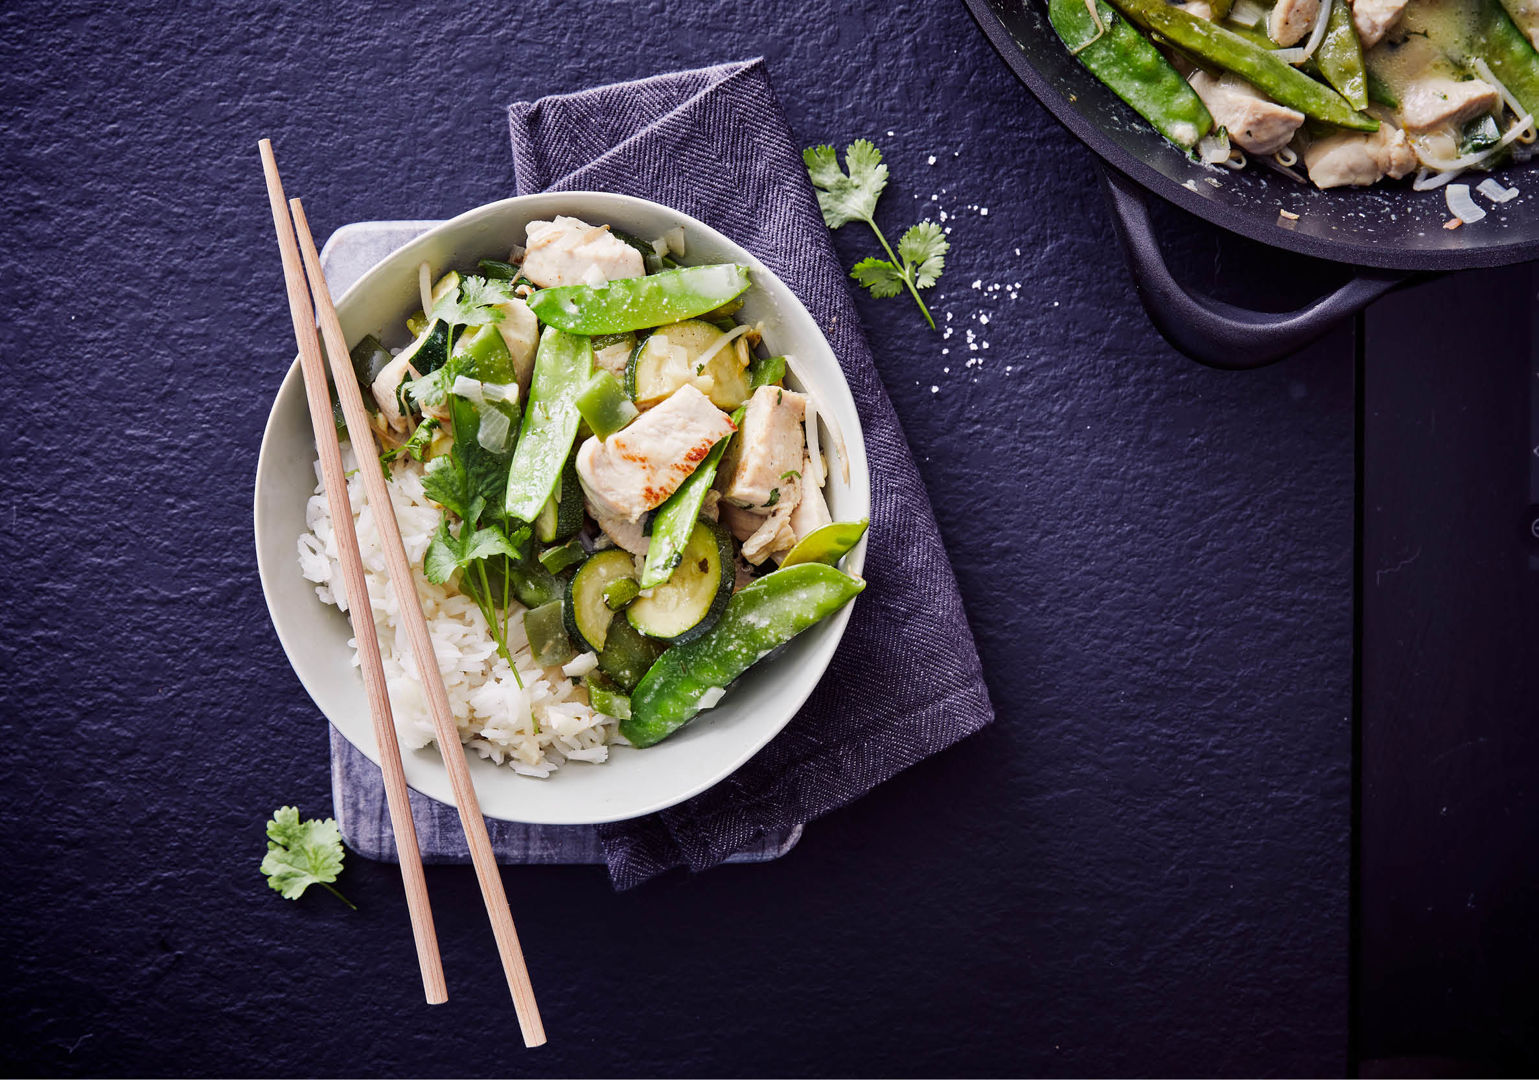 Thai smile on your table with this green curry